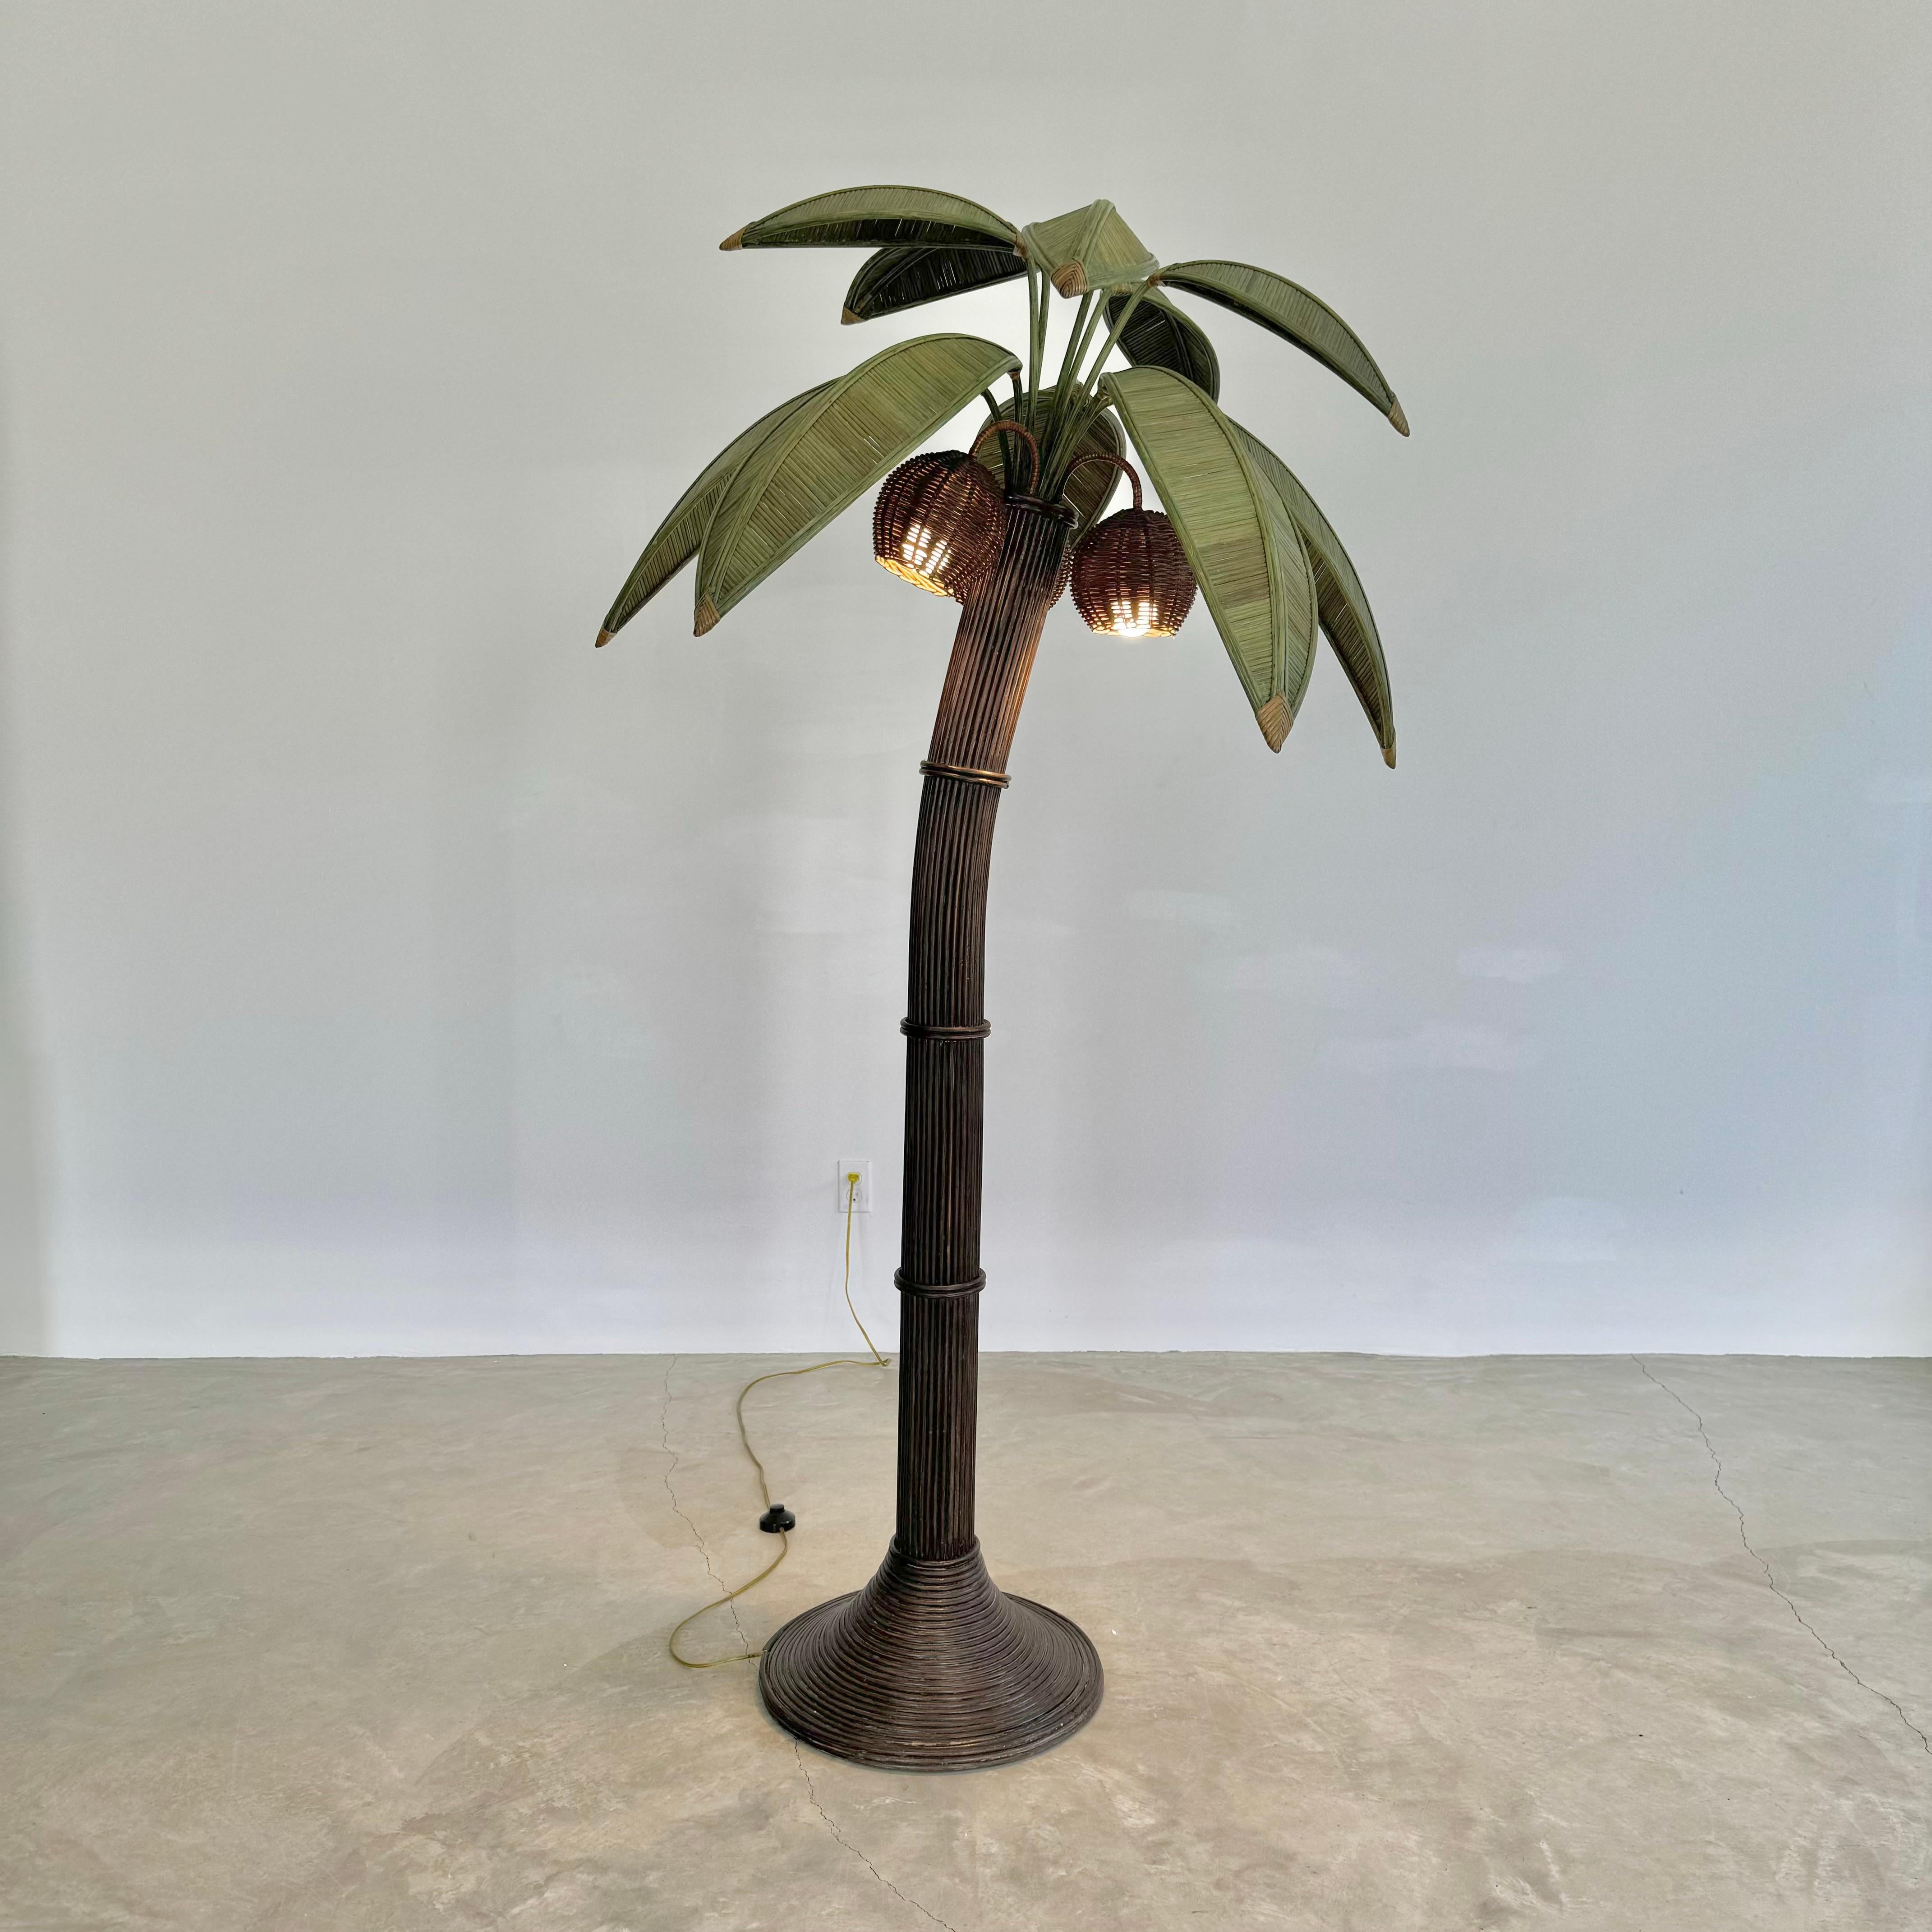 Beachy floor lamp of a palm tree. Original lamp made in the 1970s. Just under 7 feet tall. Made of rattan and wicker and darkened bamboo. Curved trunk resembles a leaning palm tree. Three wicker coconuts each contain a socket/light inside. Coconuts